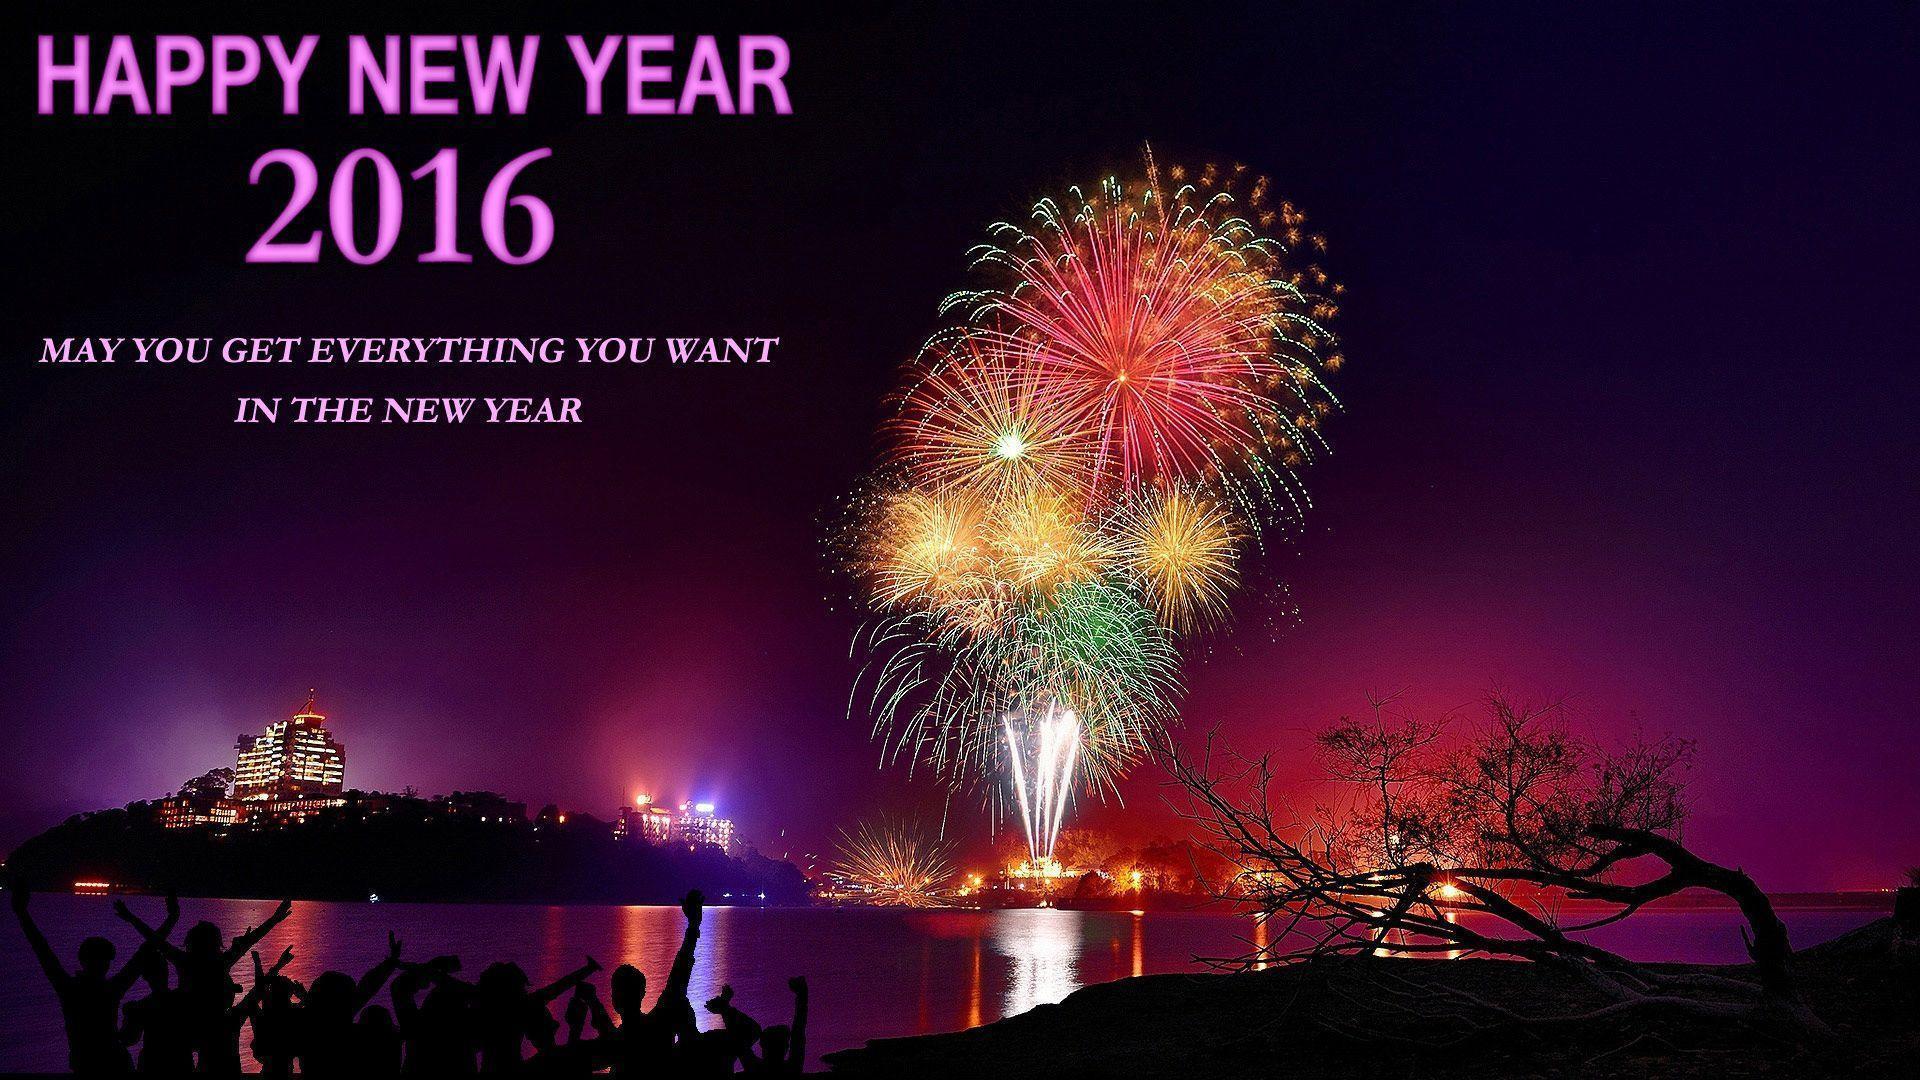 Happy new year 2016 wishes wallpaper